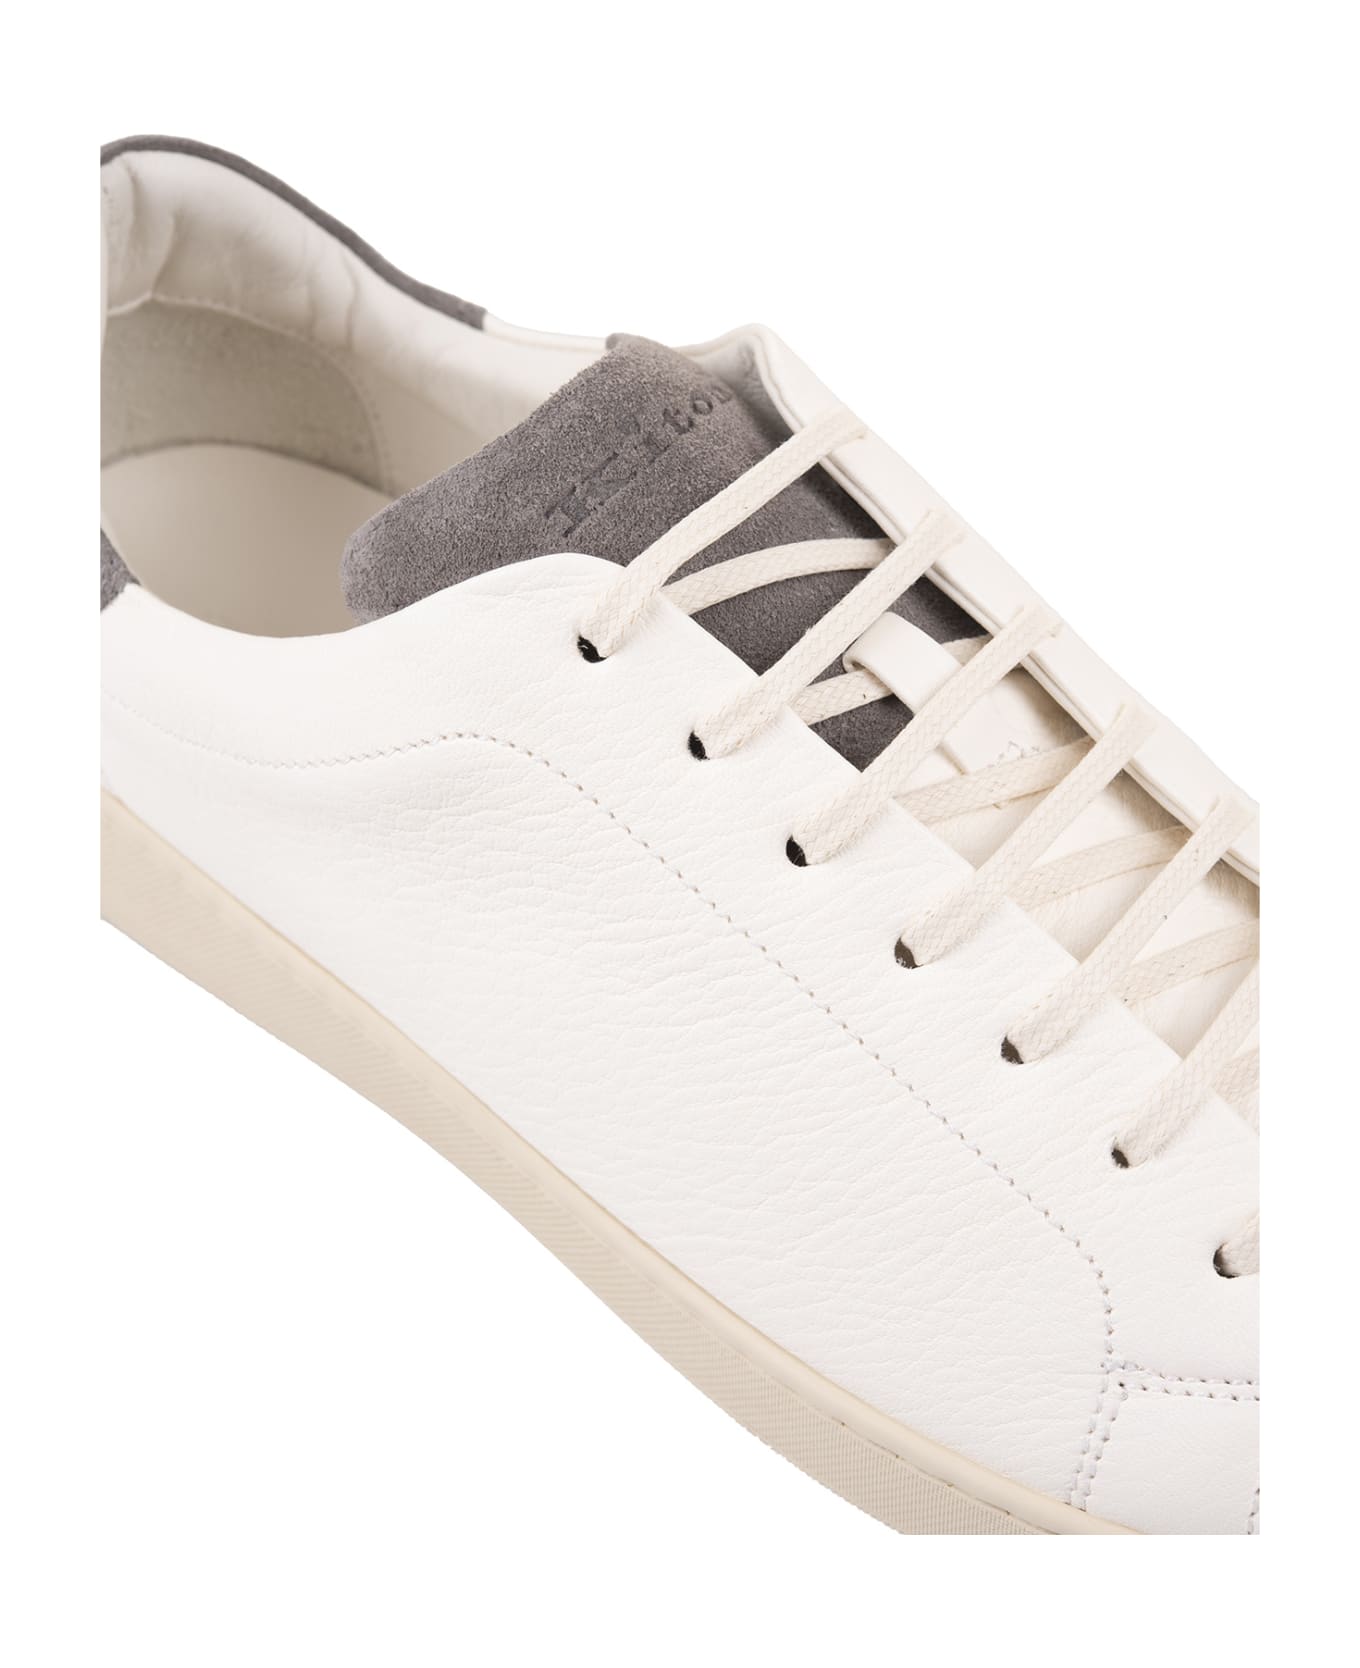 Kiton White Leather Sneakers With Taupe Details - Grey スニーカー